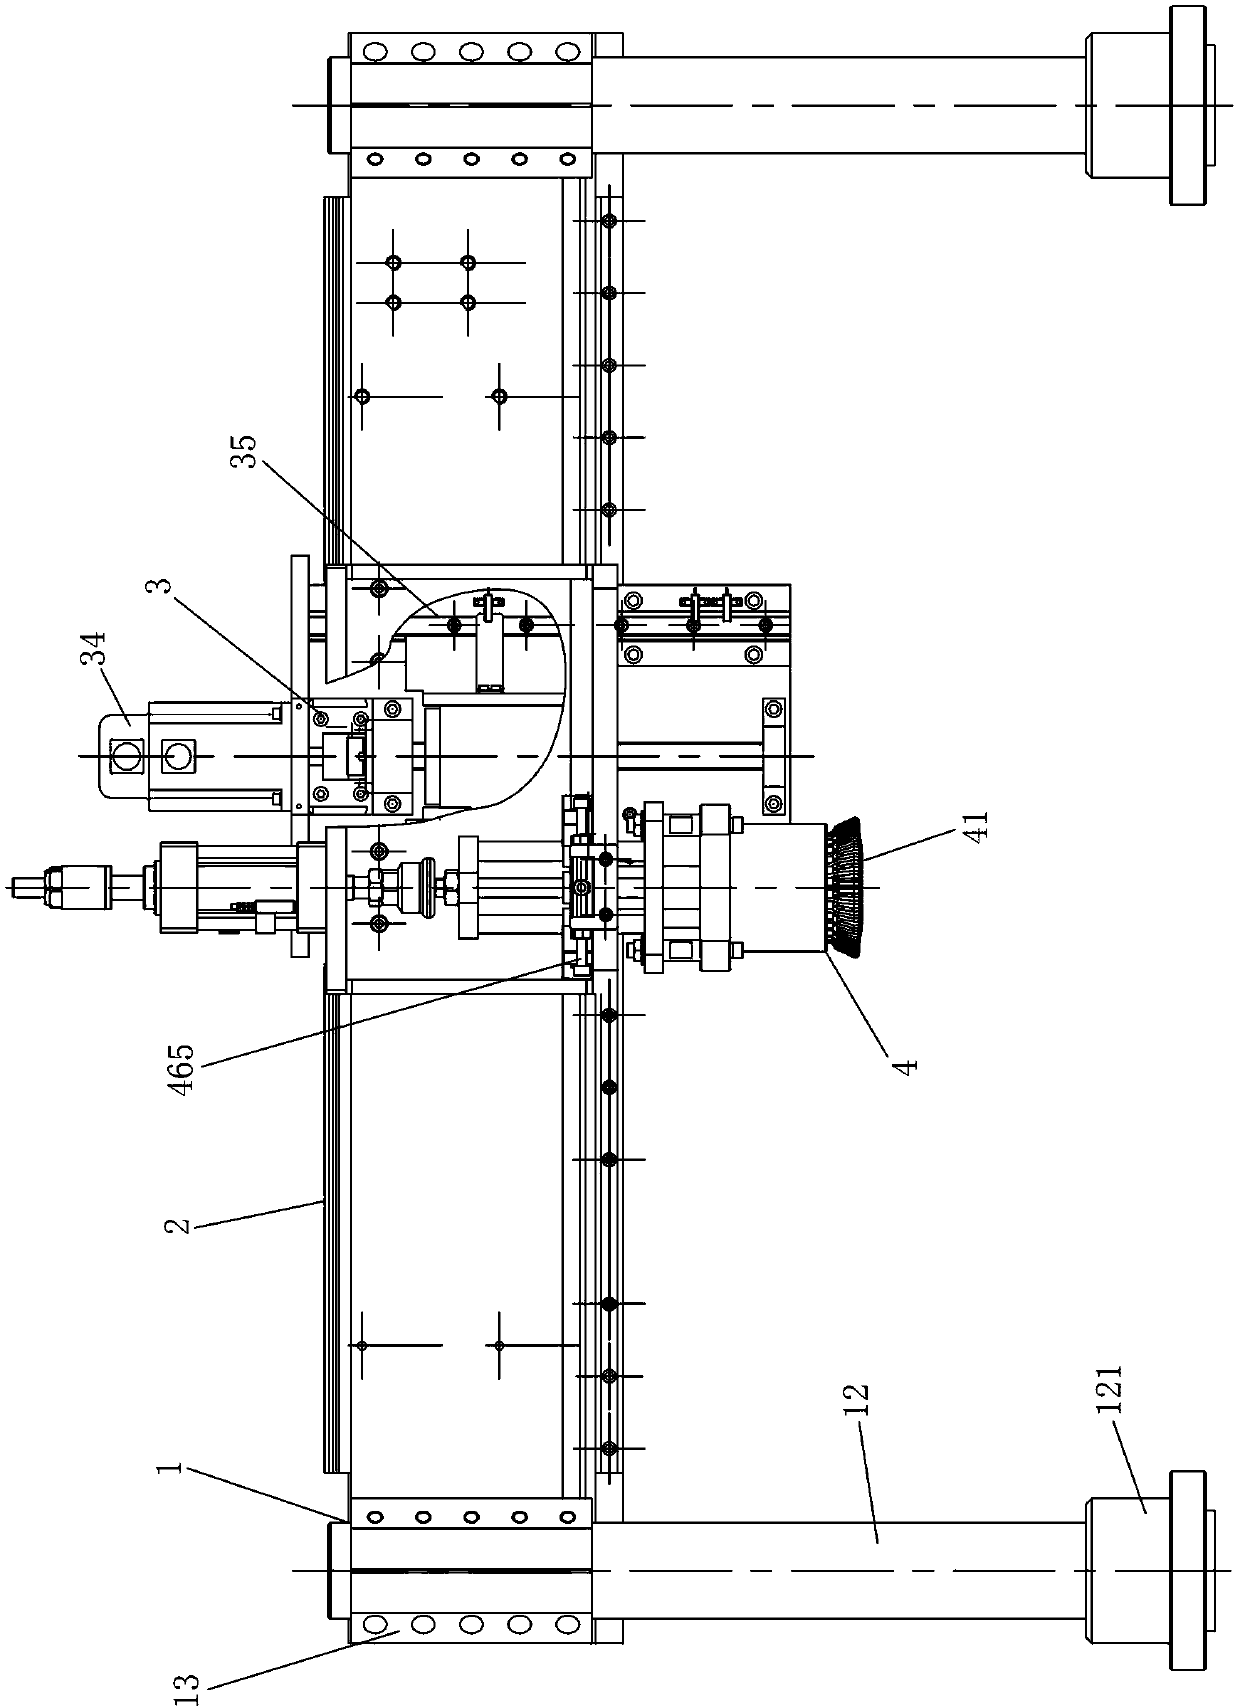 Automatic integrated line clamping and threading device for motor rotor